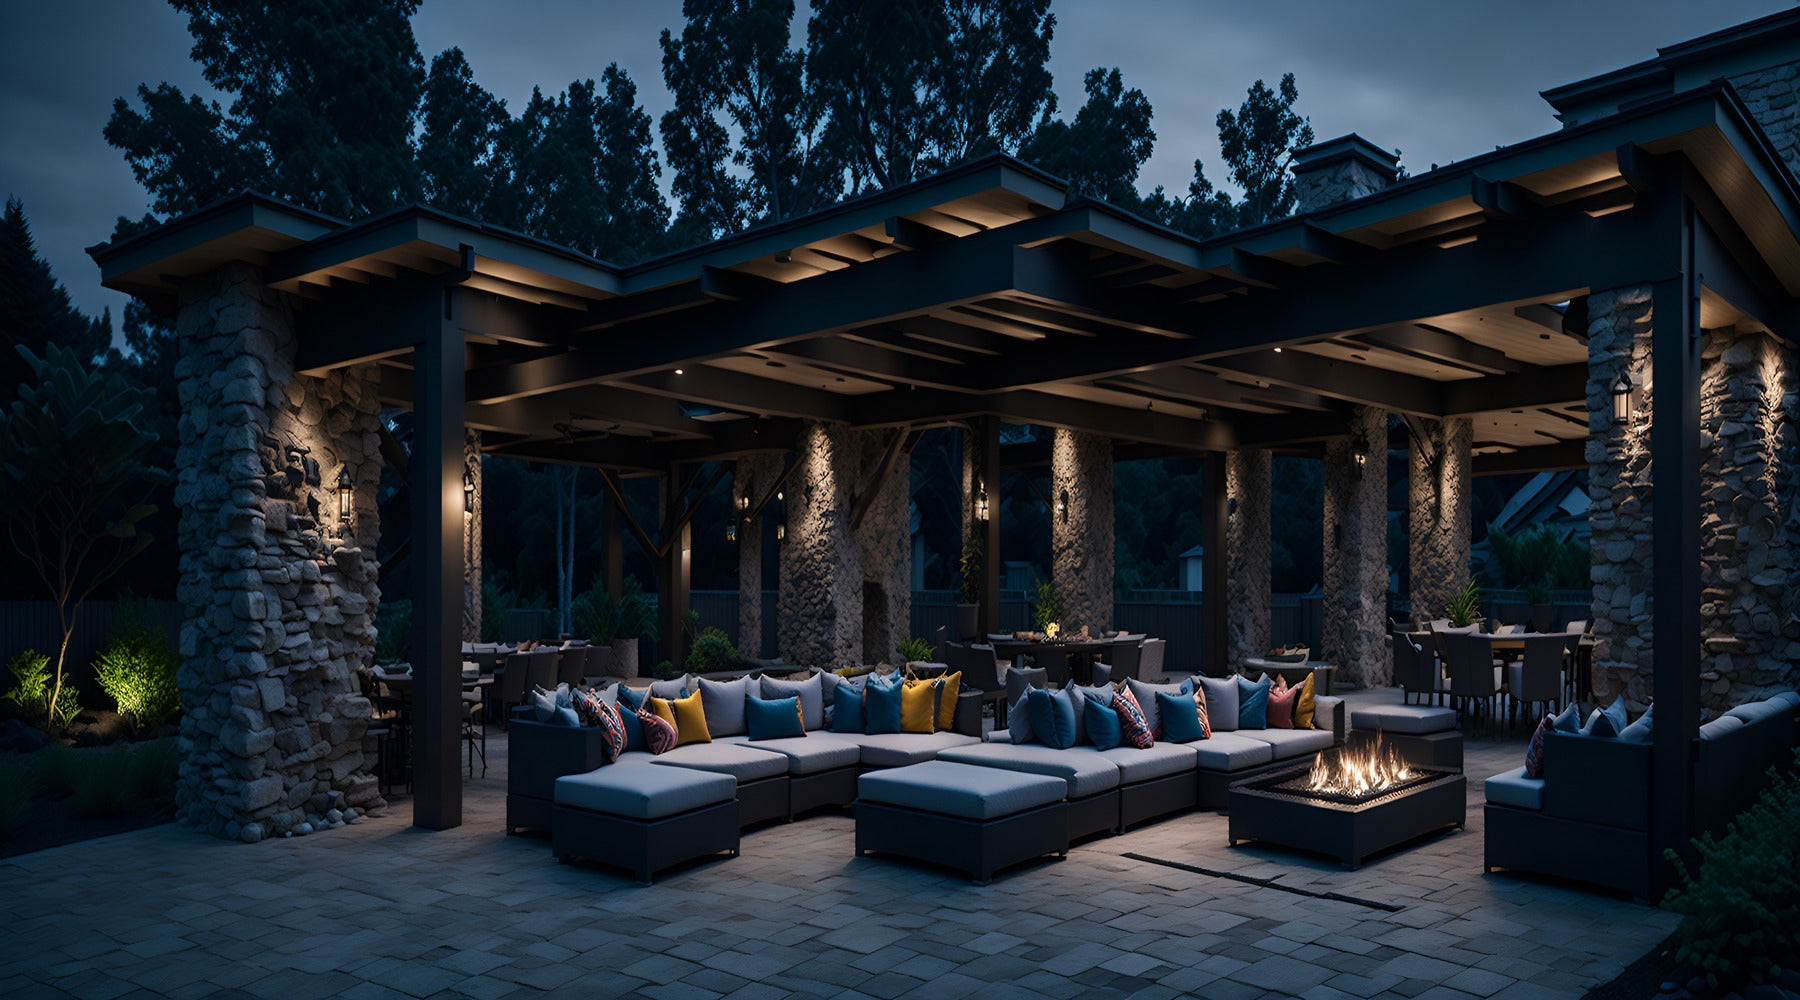 LED outdoor security lights illuminating cozy outdoor lounge area at night